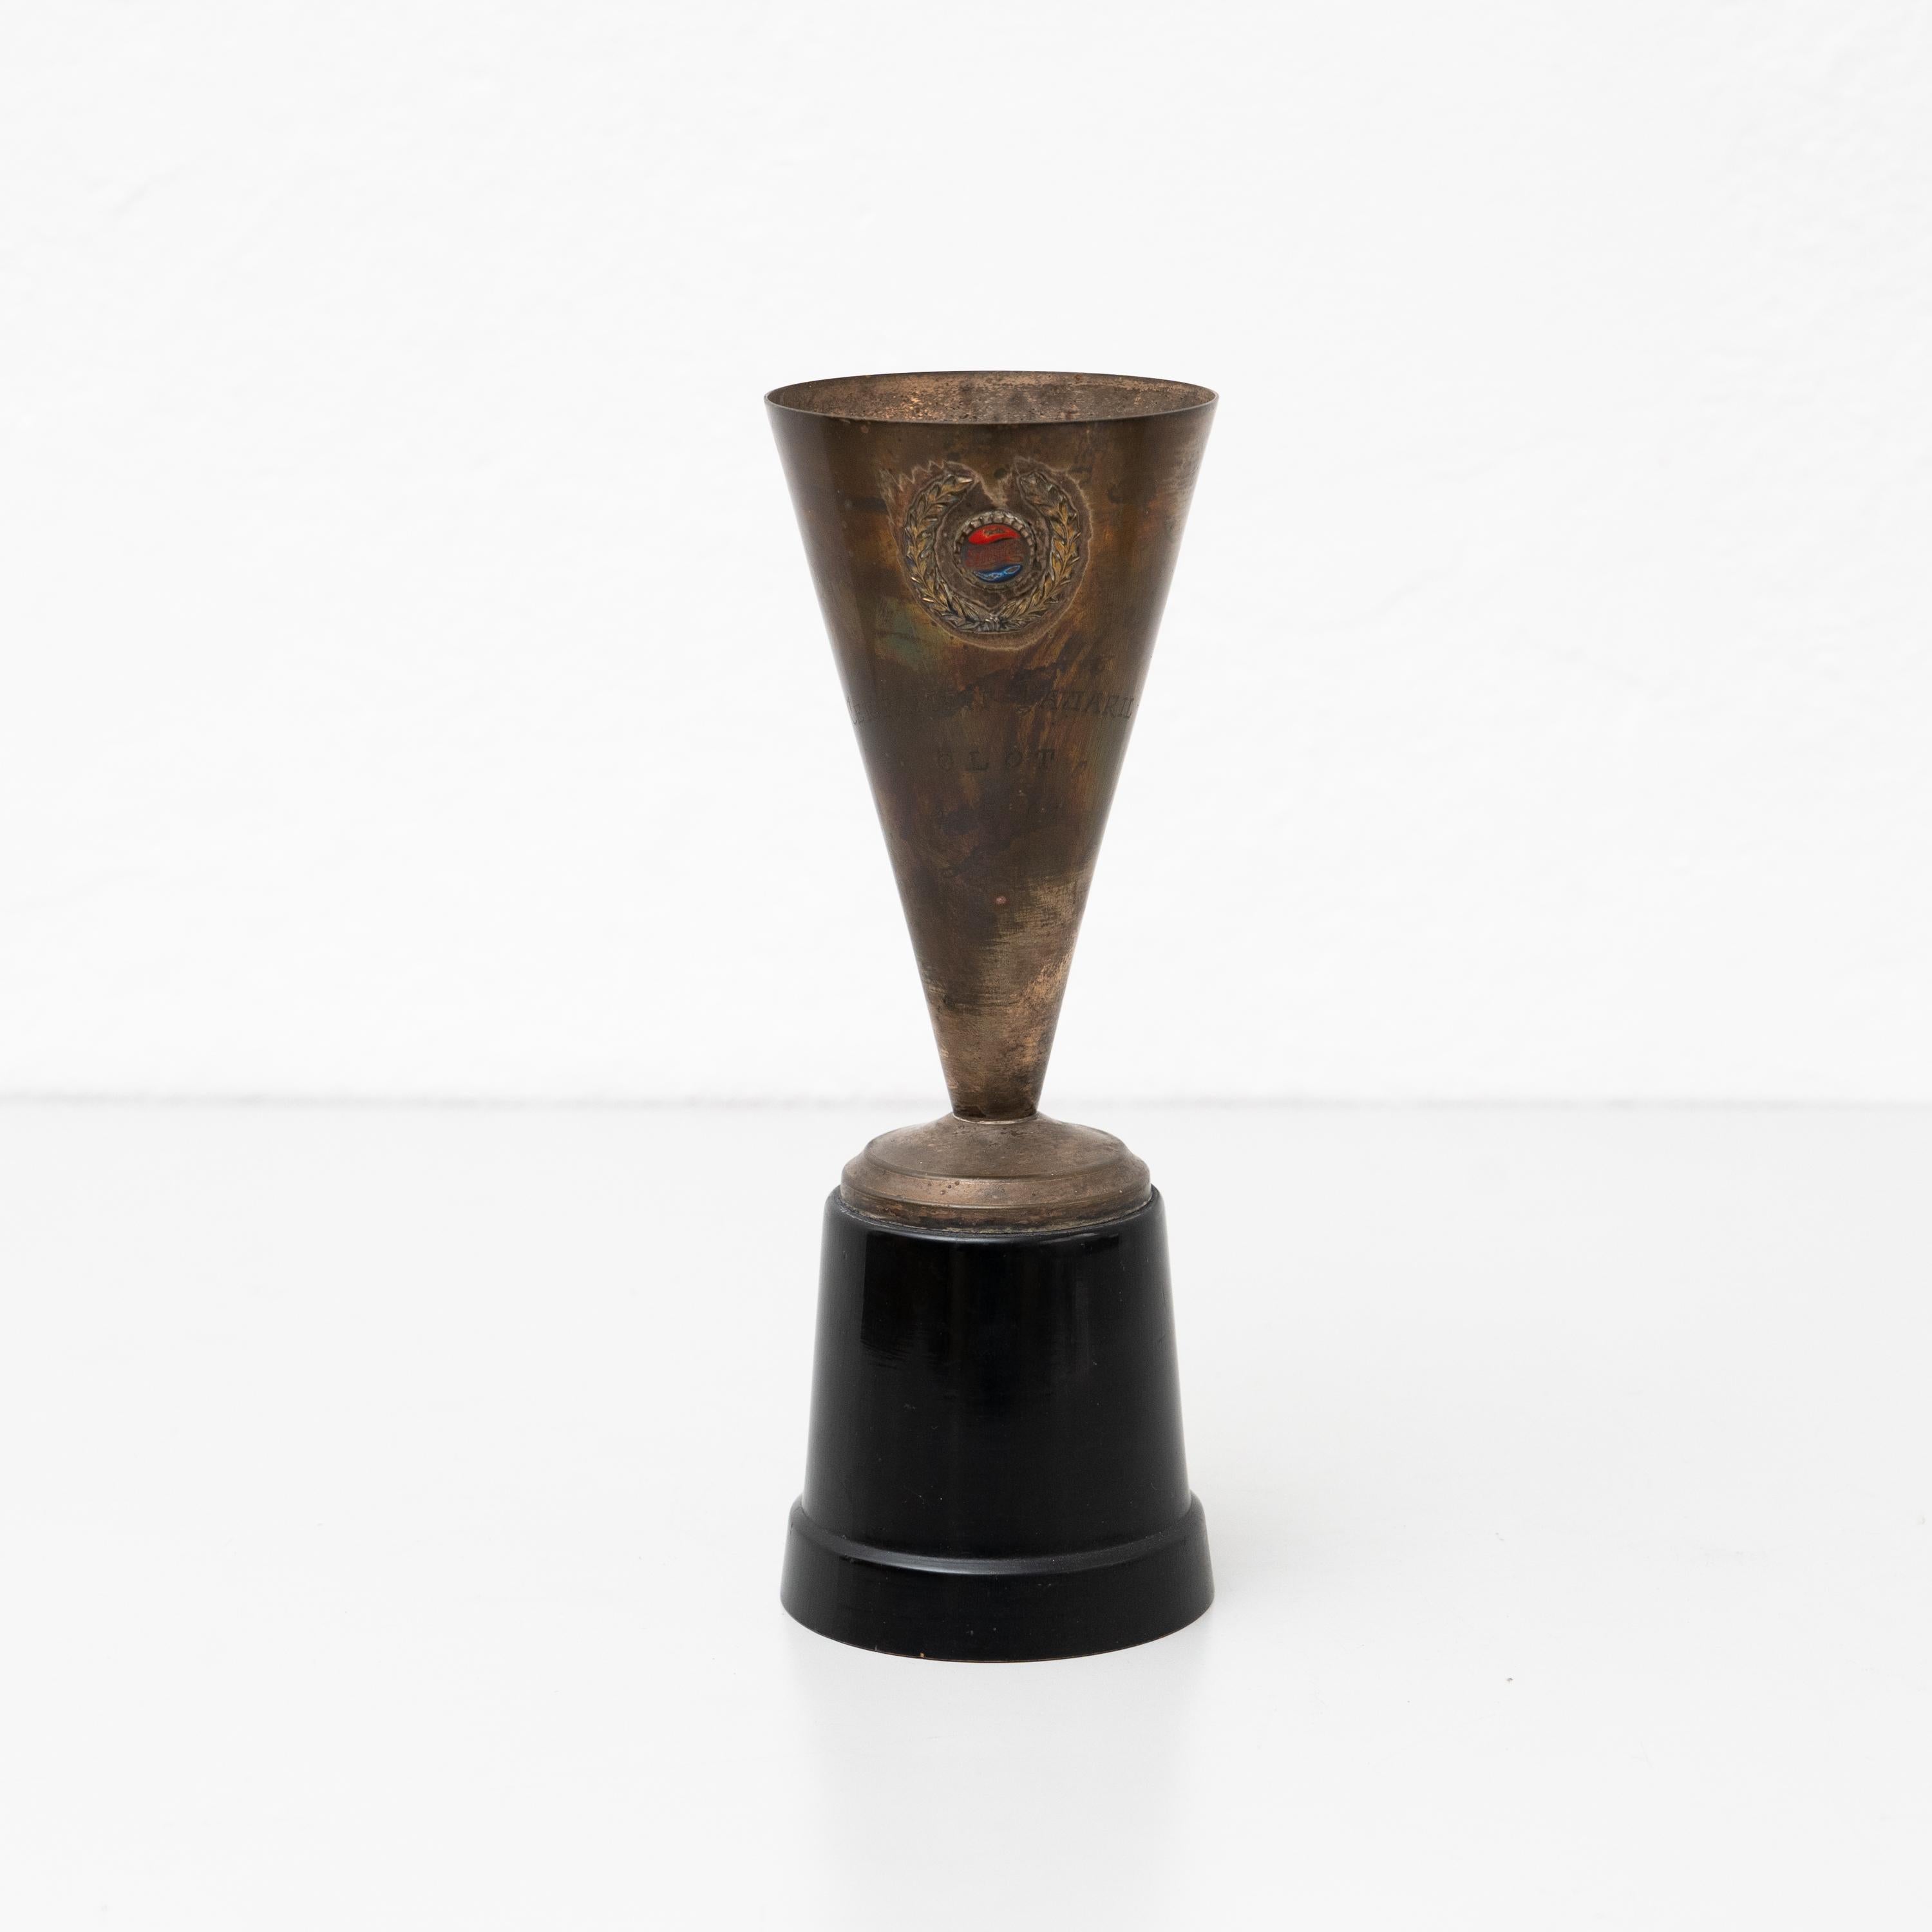 Vintage Brass Pepsi Trophy.

Made by unknown manufacturer in Spain, circa 1960.

In original condition, with minor wear consistent with age and use, preserving a beautiful patina.

Materials:
Brass.